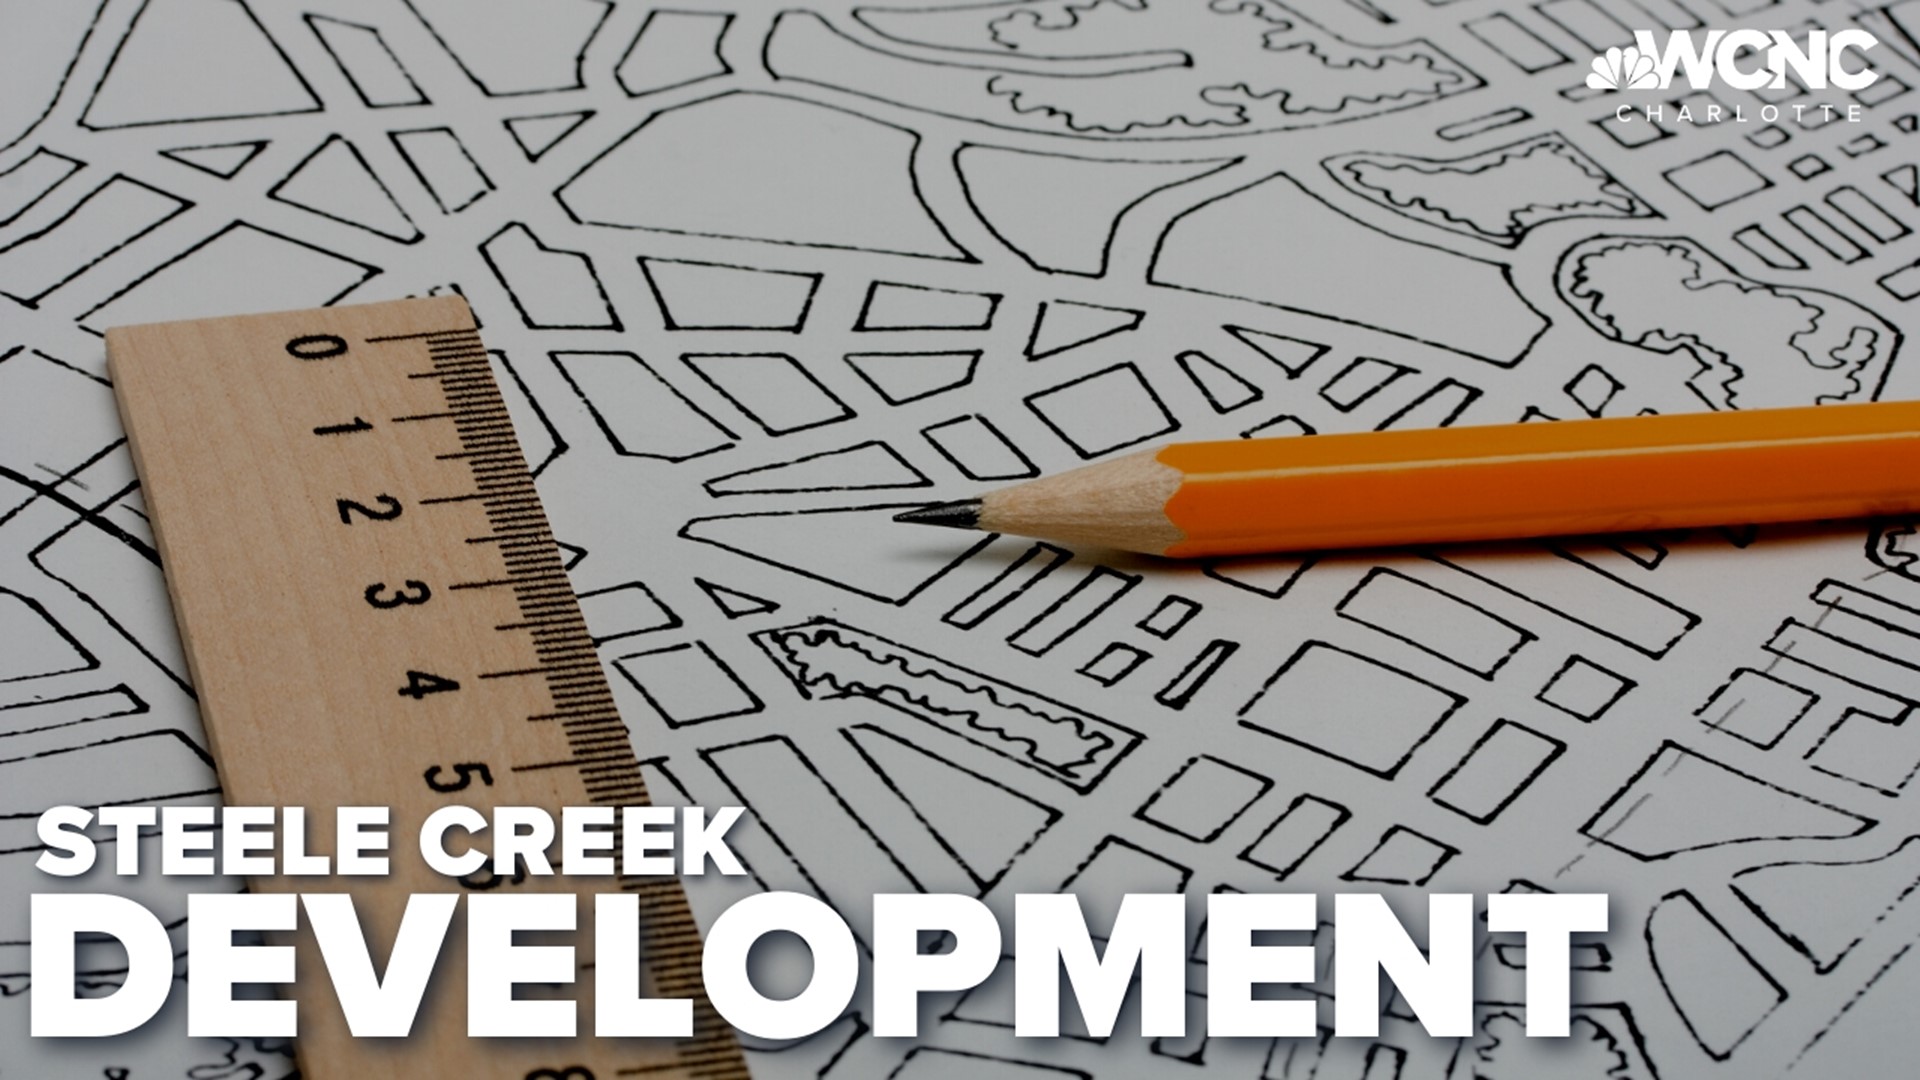 More money could be coming to the Steele Creek area.